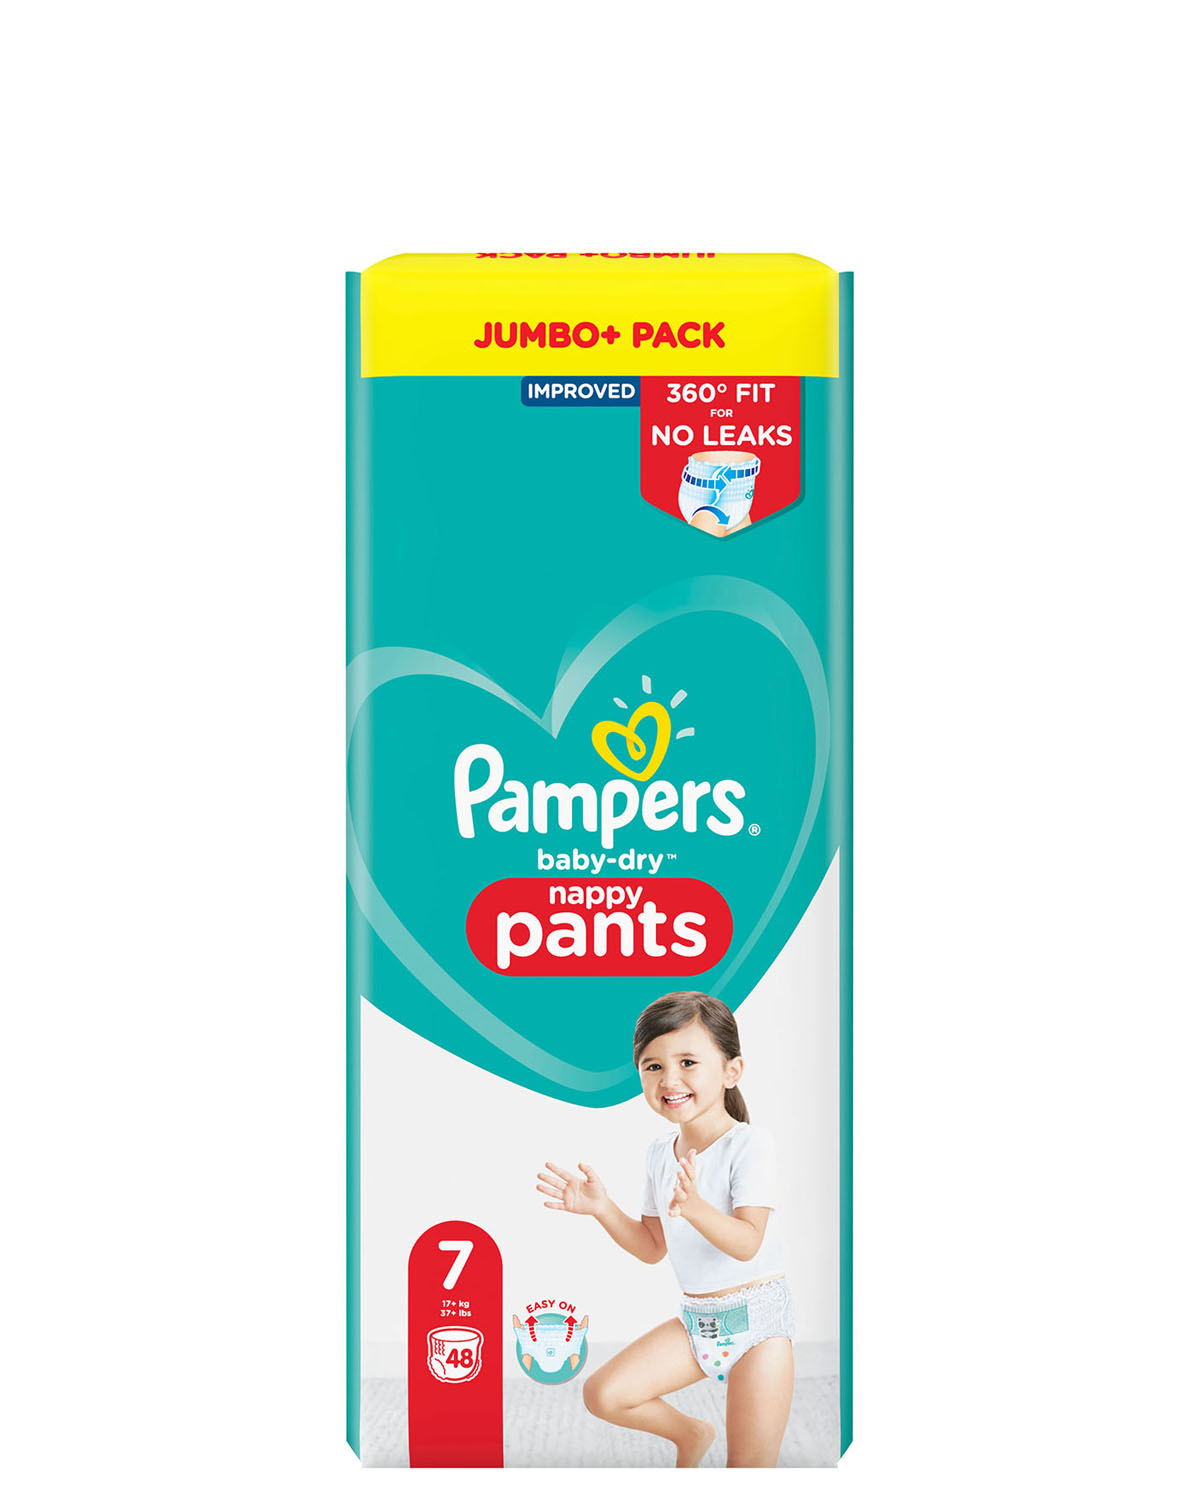 Pampers Baby Dry Pants Size: 7 - 48 Nappies Jumbo Pack